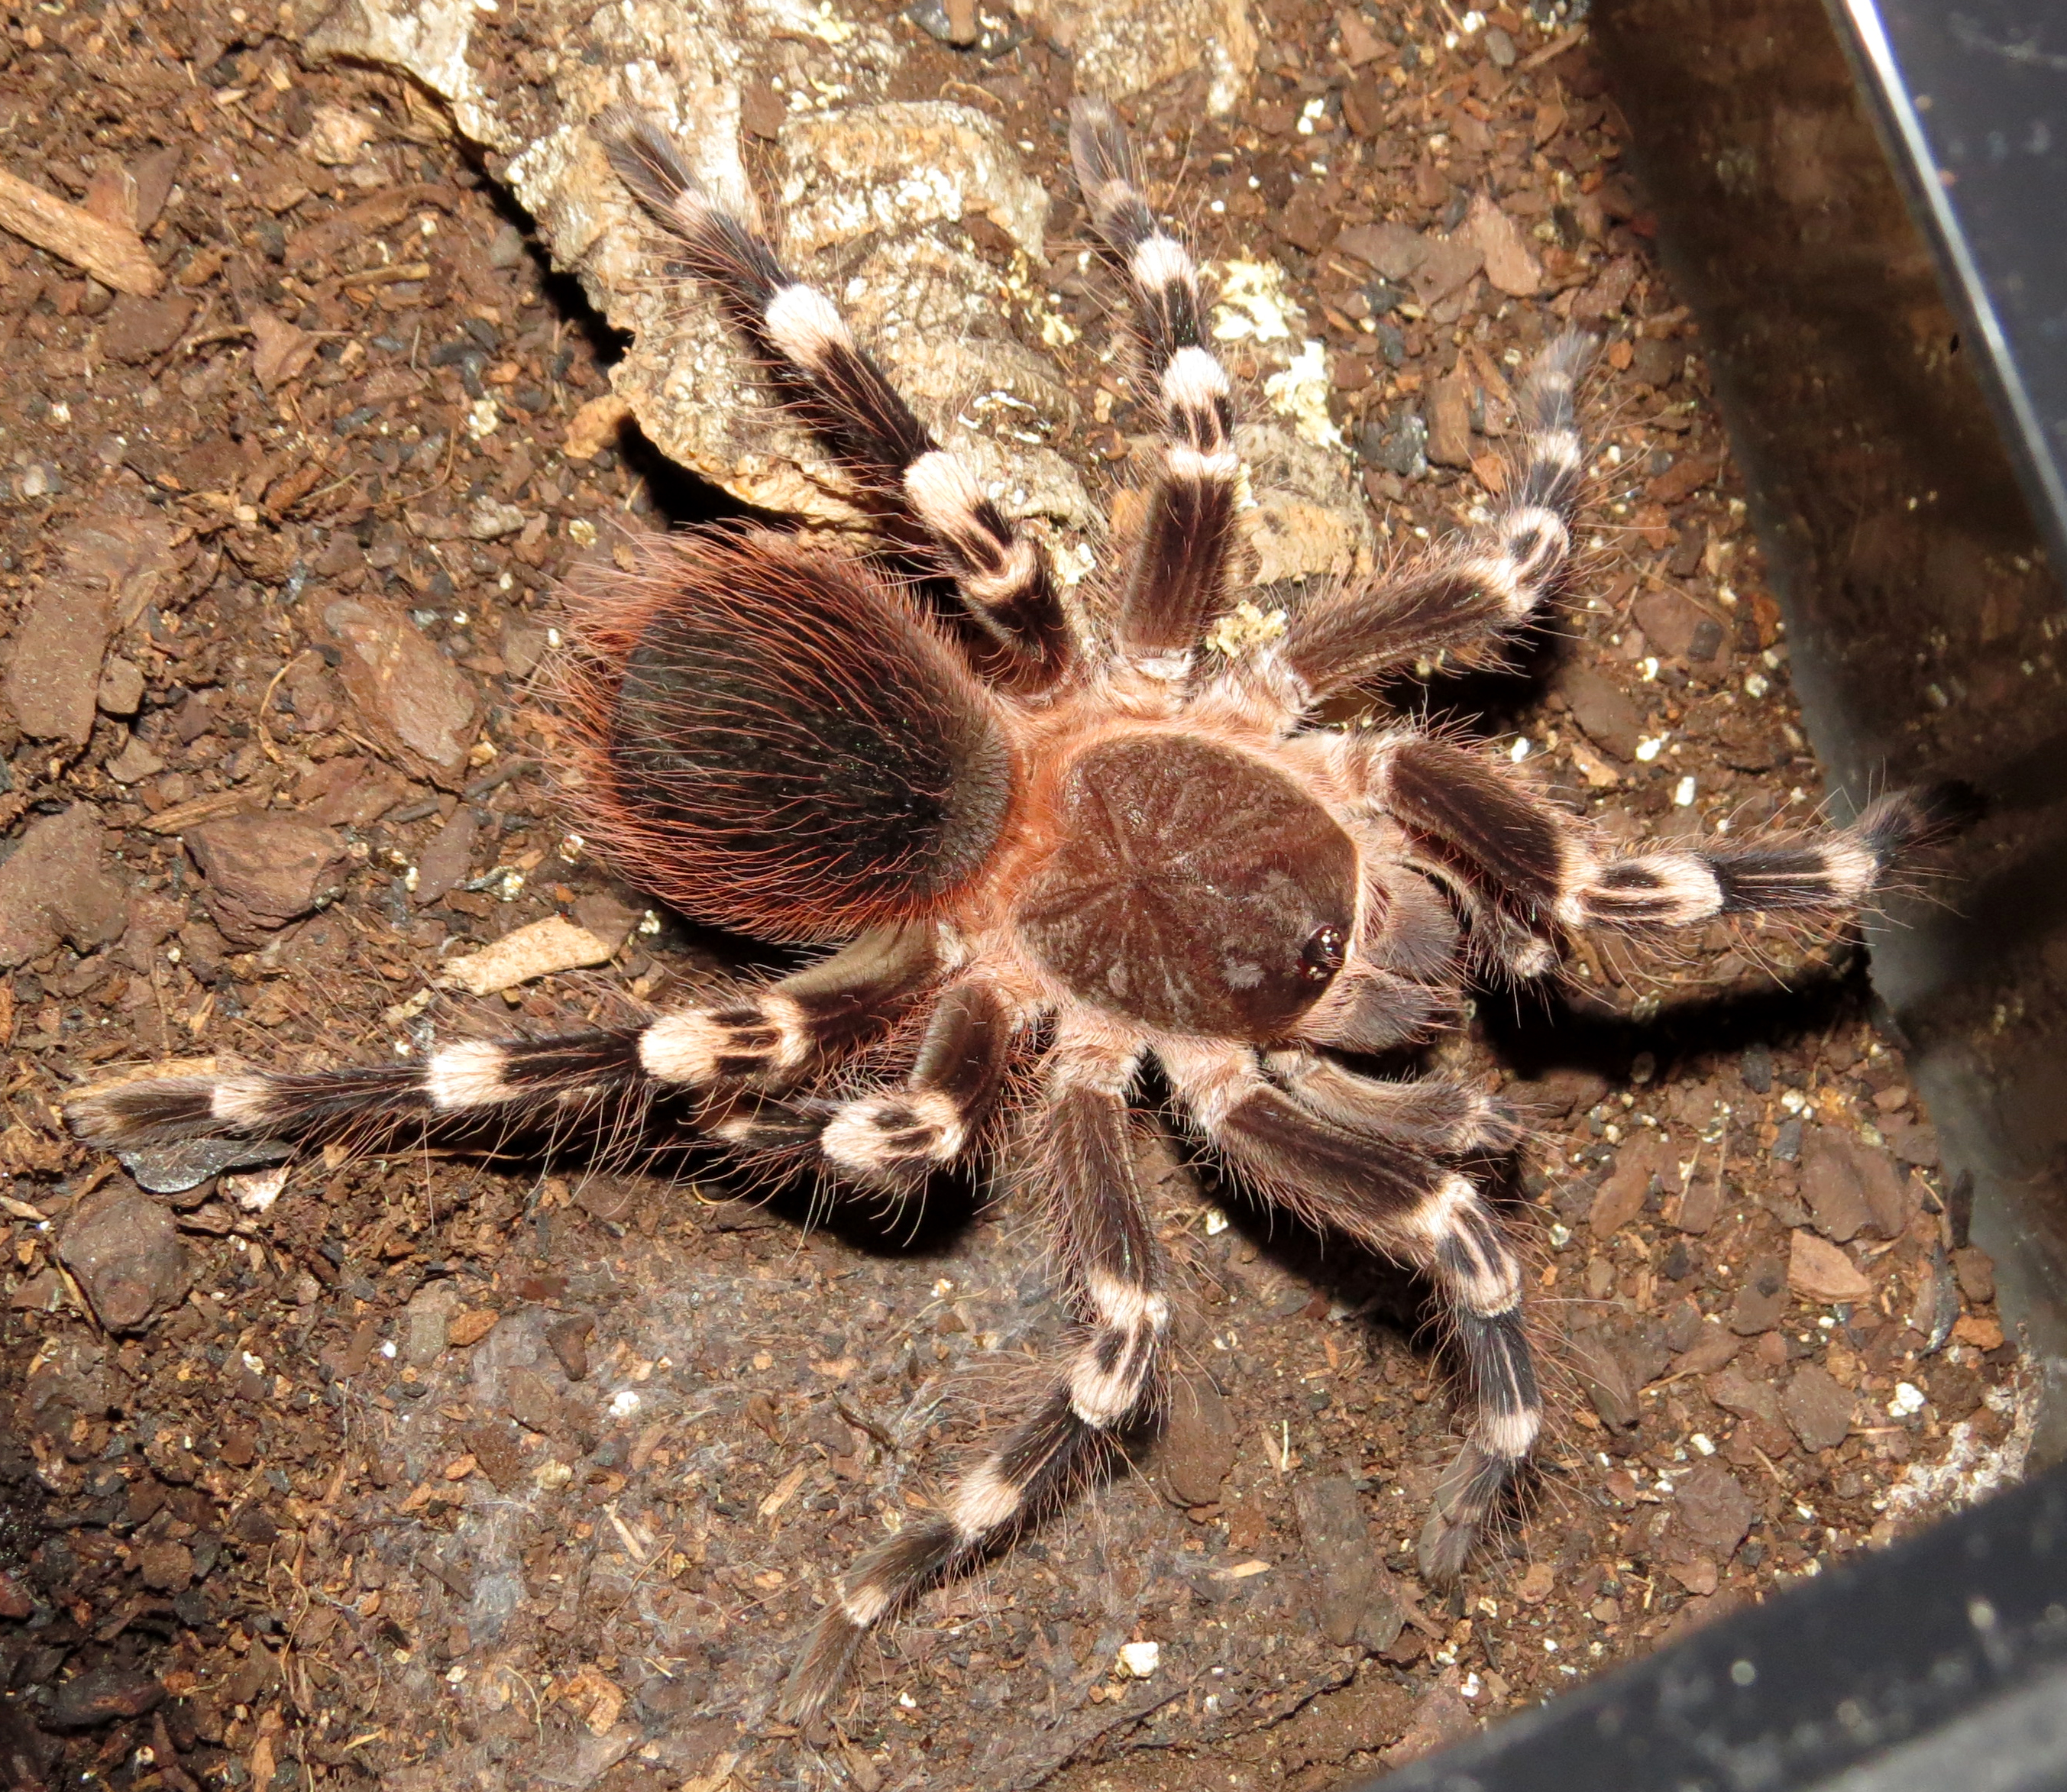 A King Deposed (♂ Acanthoscurria geniculata 3.75")